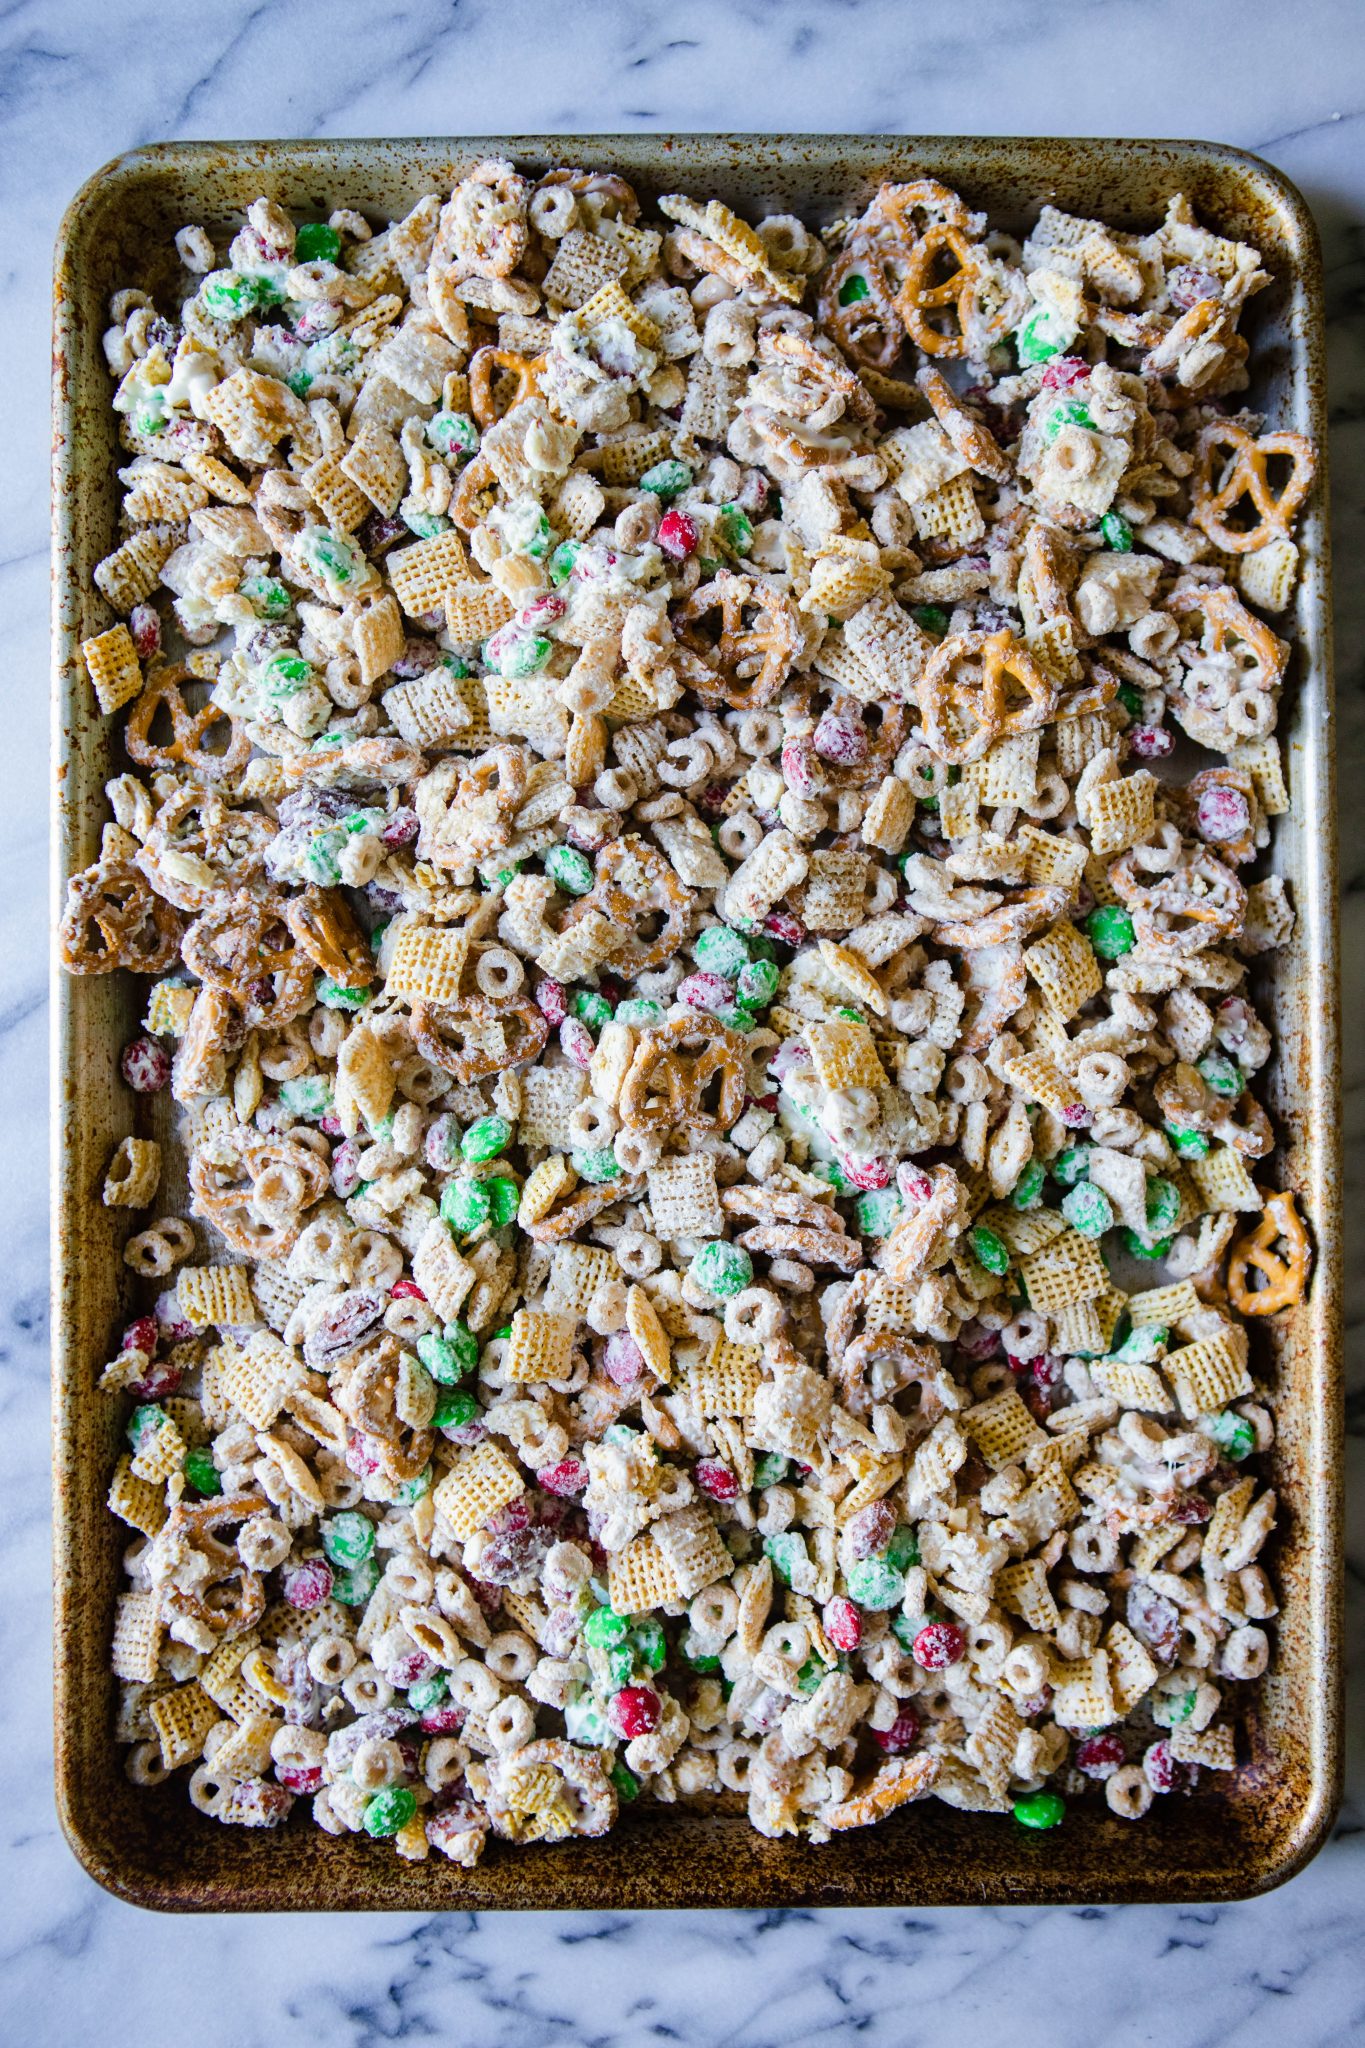 melted white chocolate chex mix spread out on a baking sheet